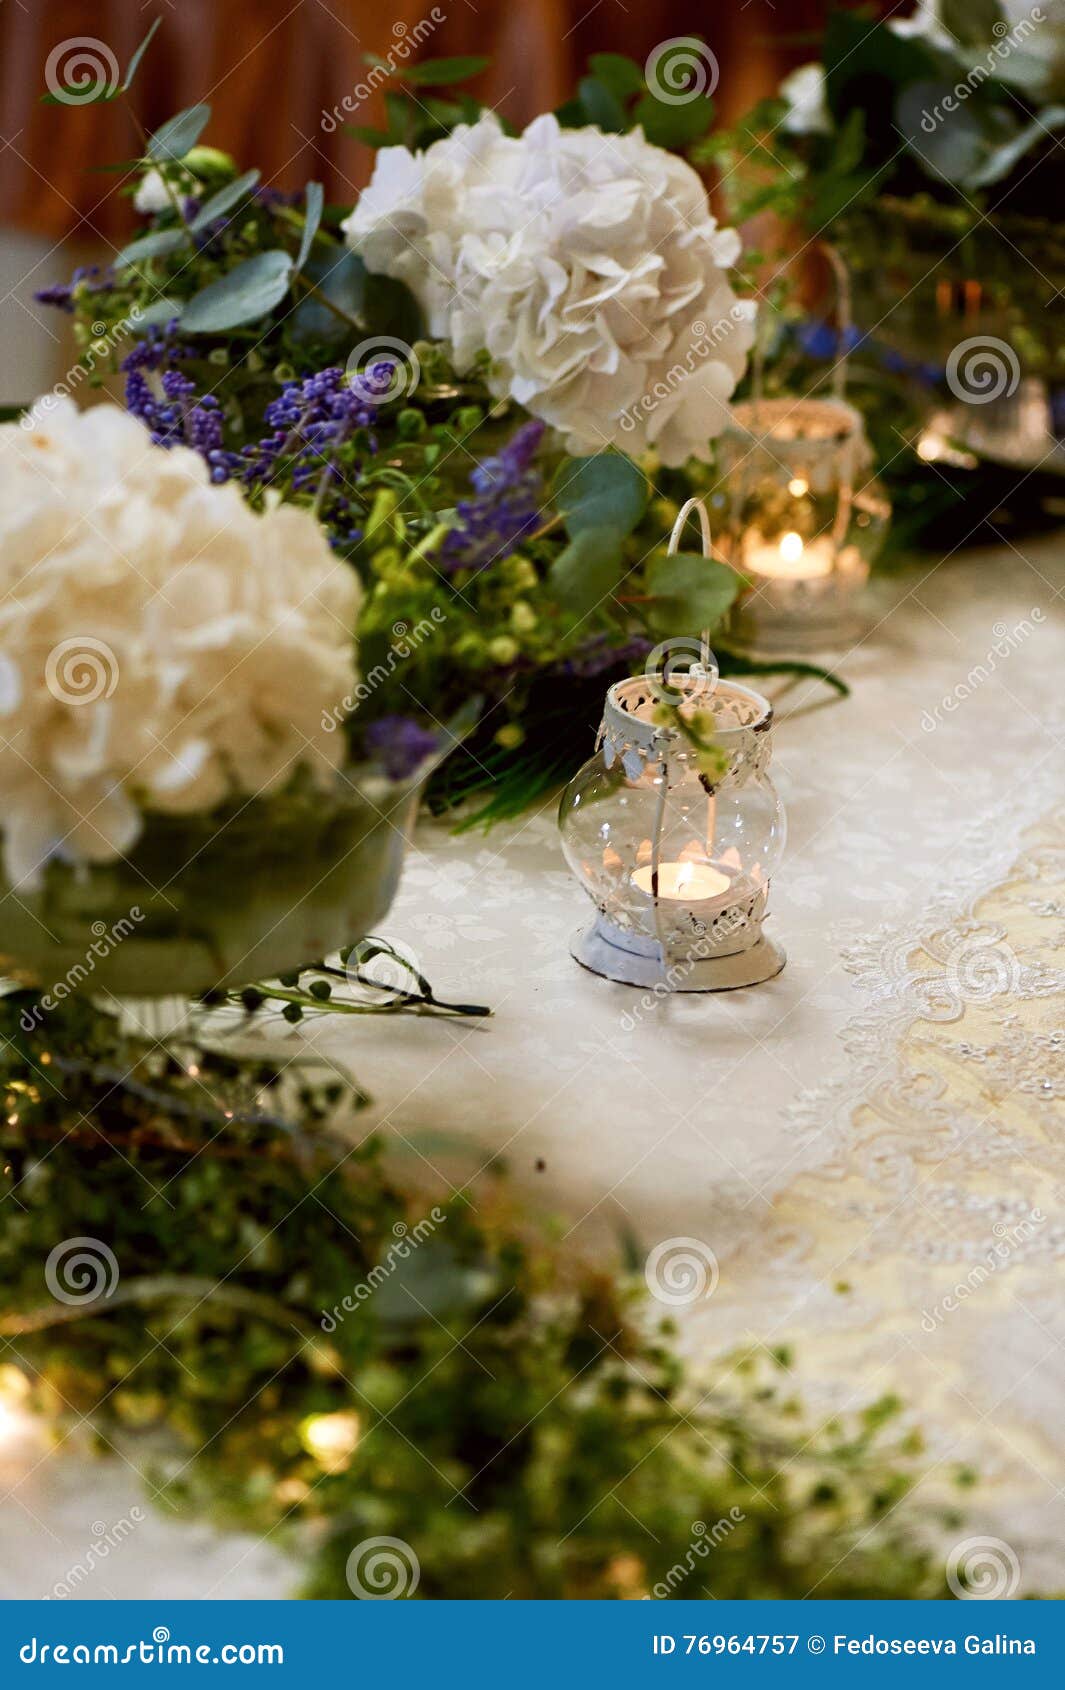 Wedding Table Decoration With White Hydrangeas A Lace Tablecloth